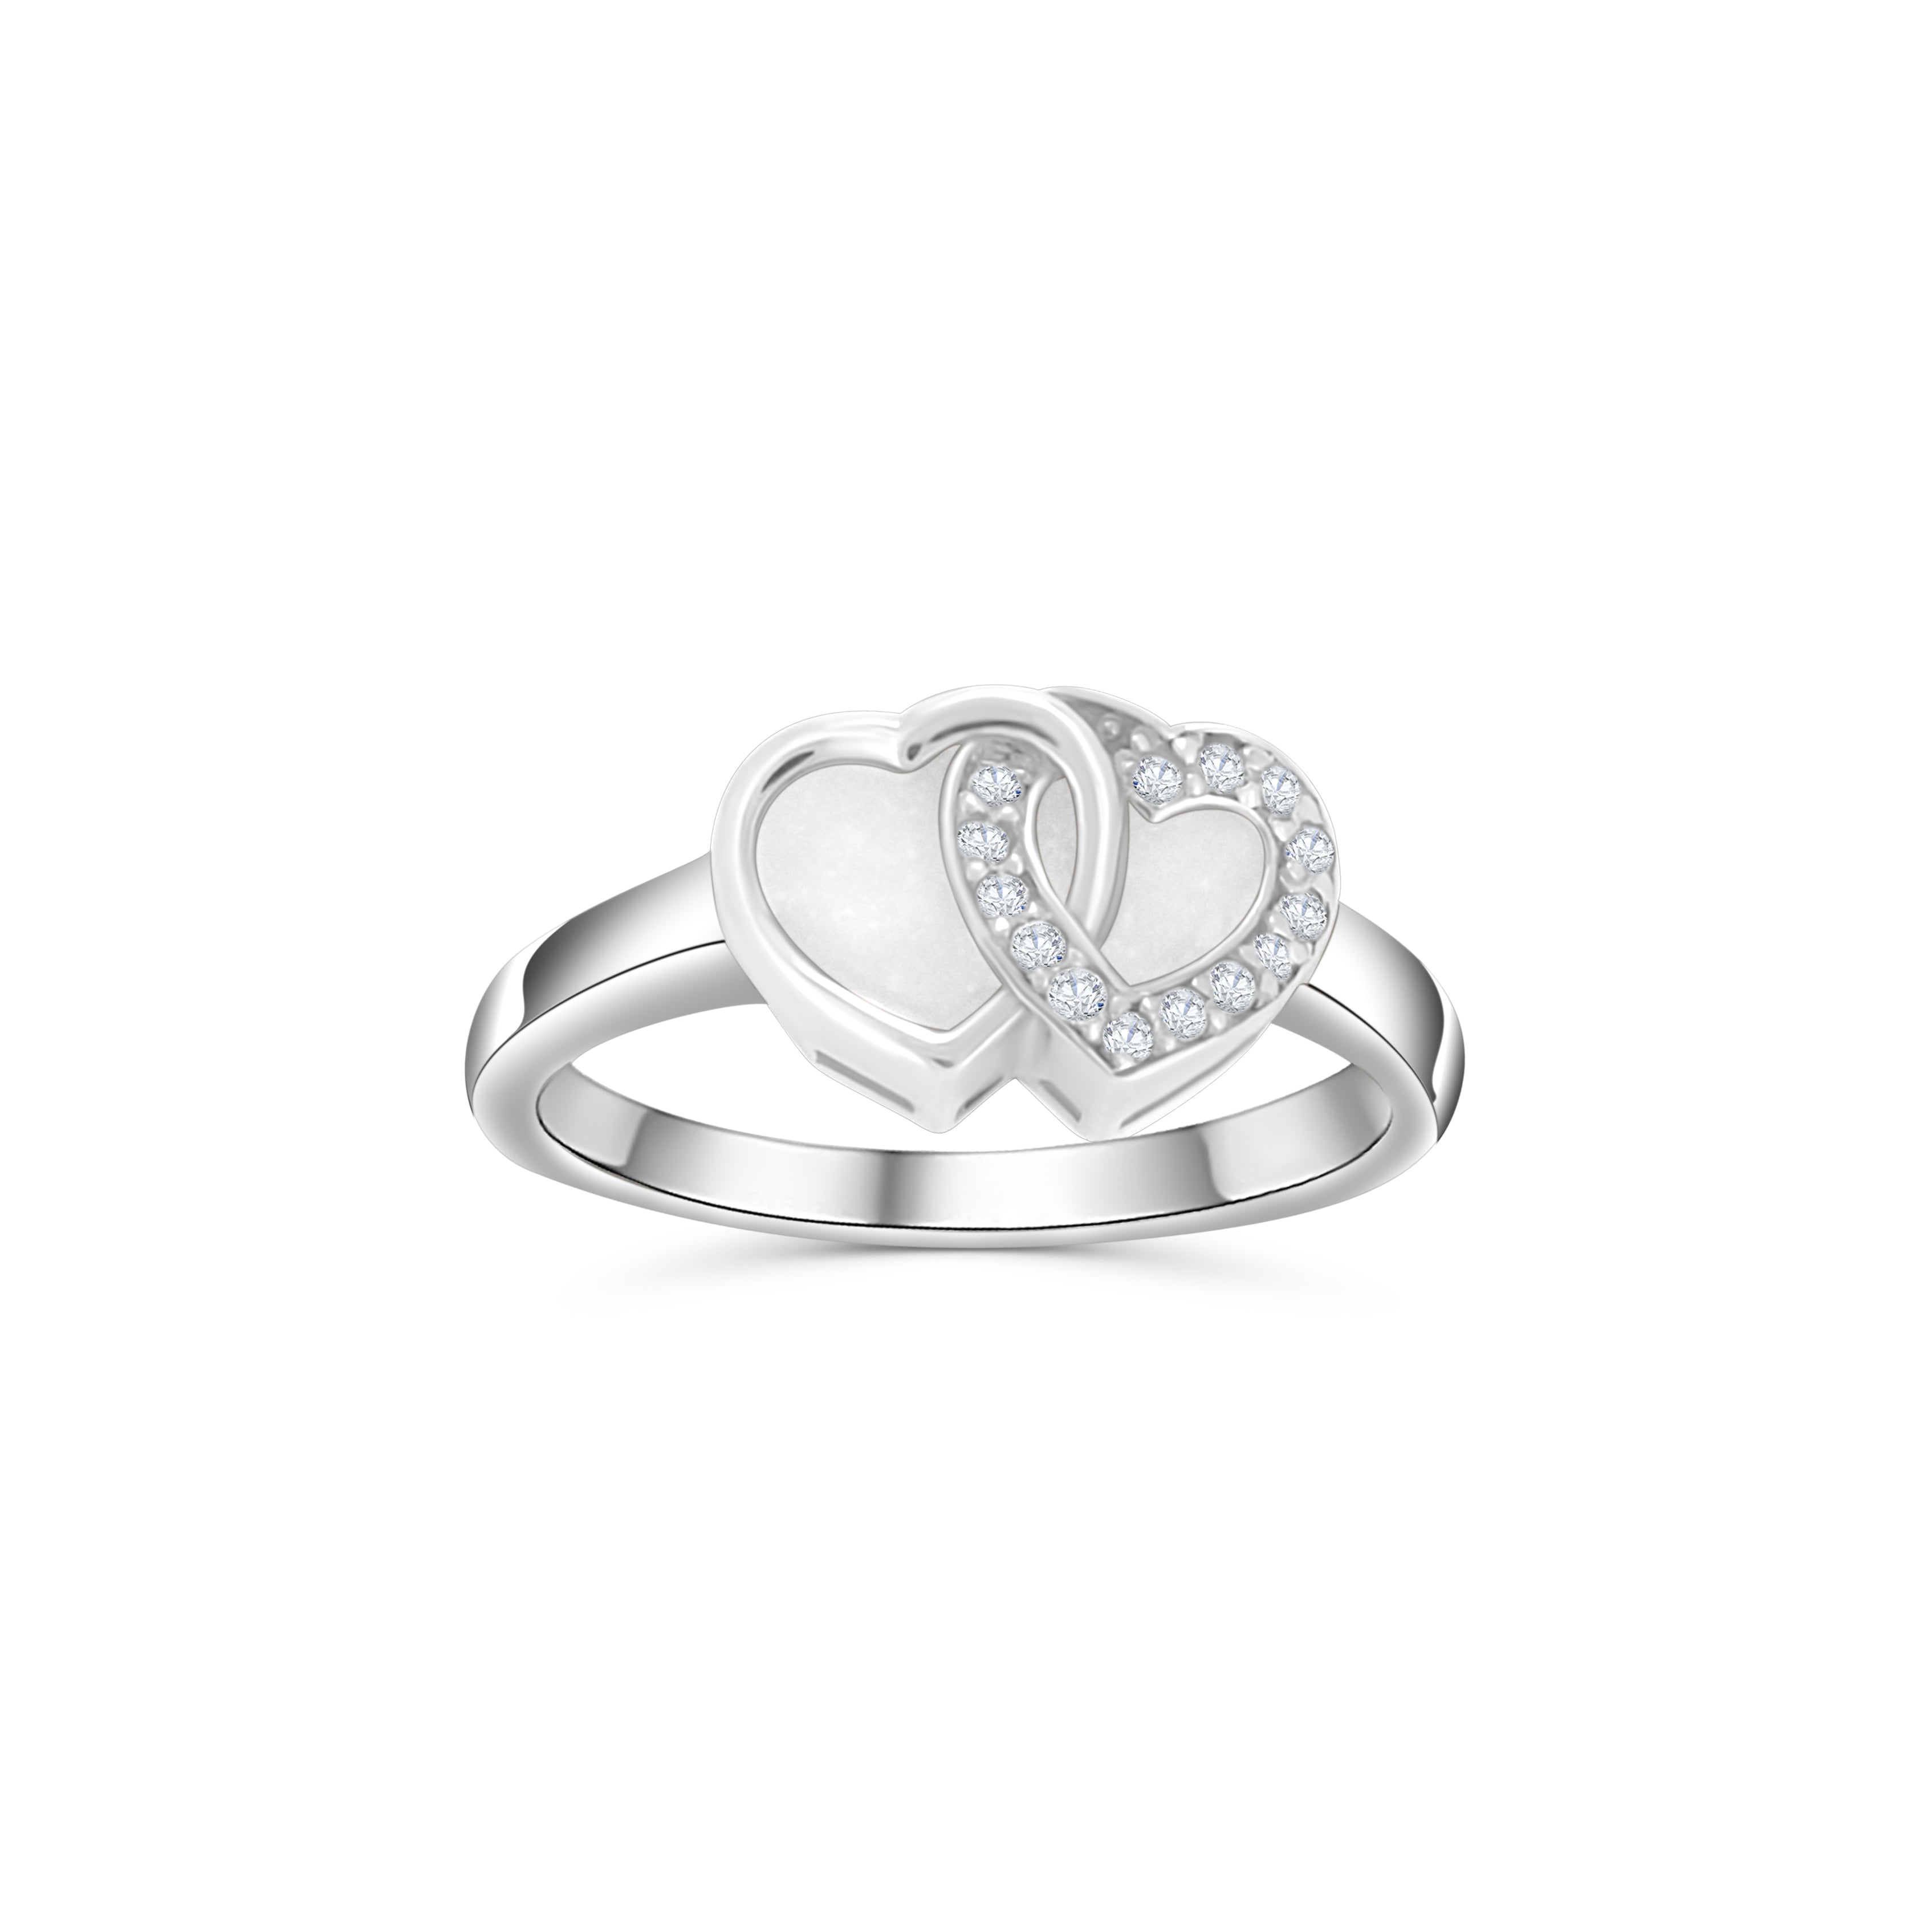 Entwined Love ring